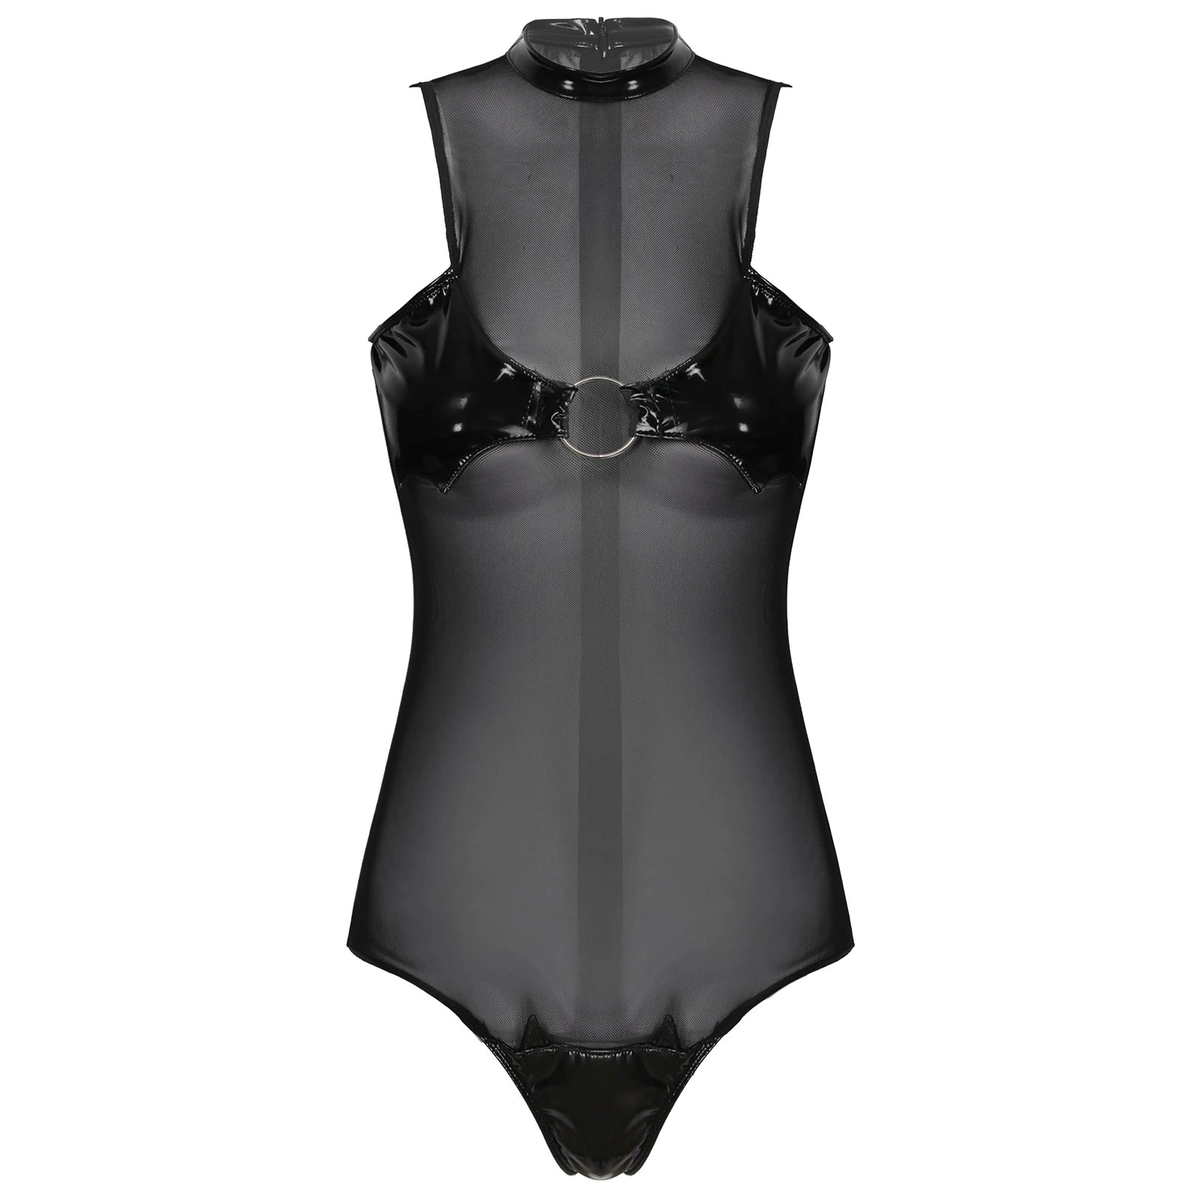 Women's Patent Leather Skinny Bodysuit / Sleeveless See-through Sexy Mesh Catsuit - EVE's SECRETS